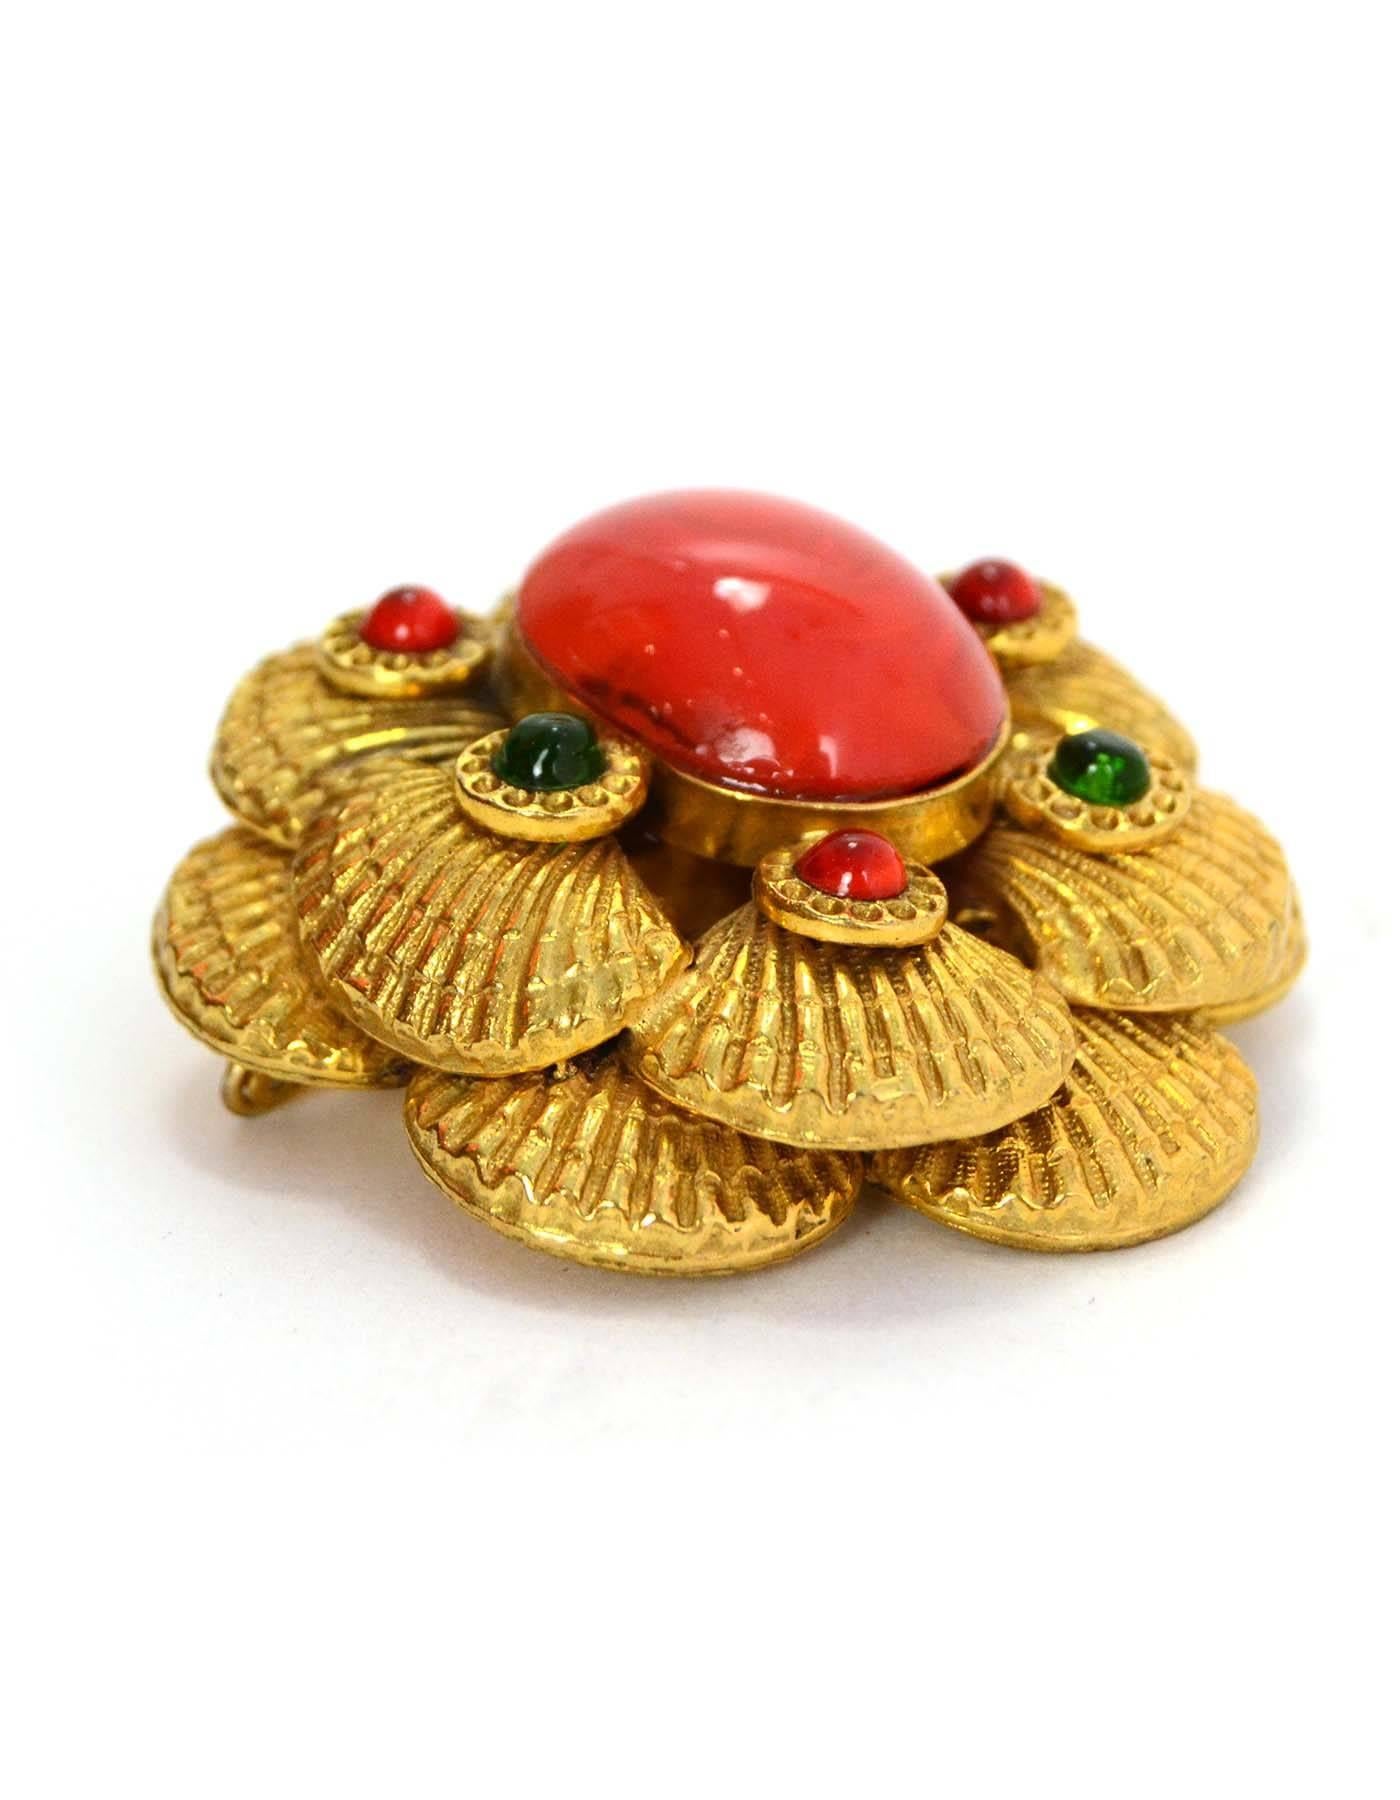 Chanel Goldtone Coral Seashell Brooch
Features layered goldtone seashells with center coral colored stone with green and coral accent stones surrounding.  Hook at back allows for brooch to also be worn as a pendant. 

    Made In: France
   